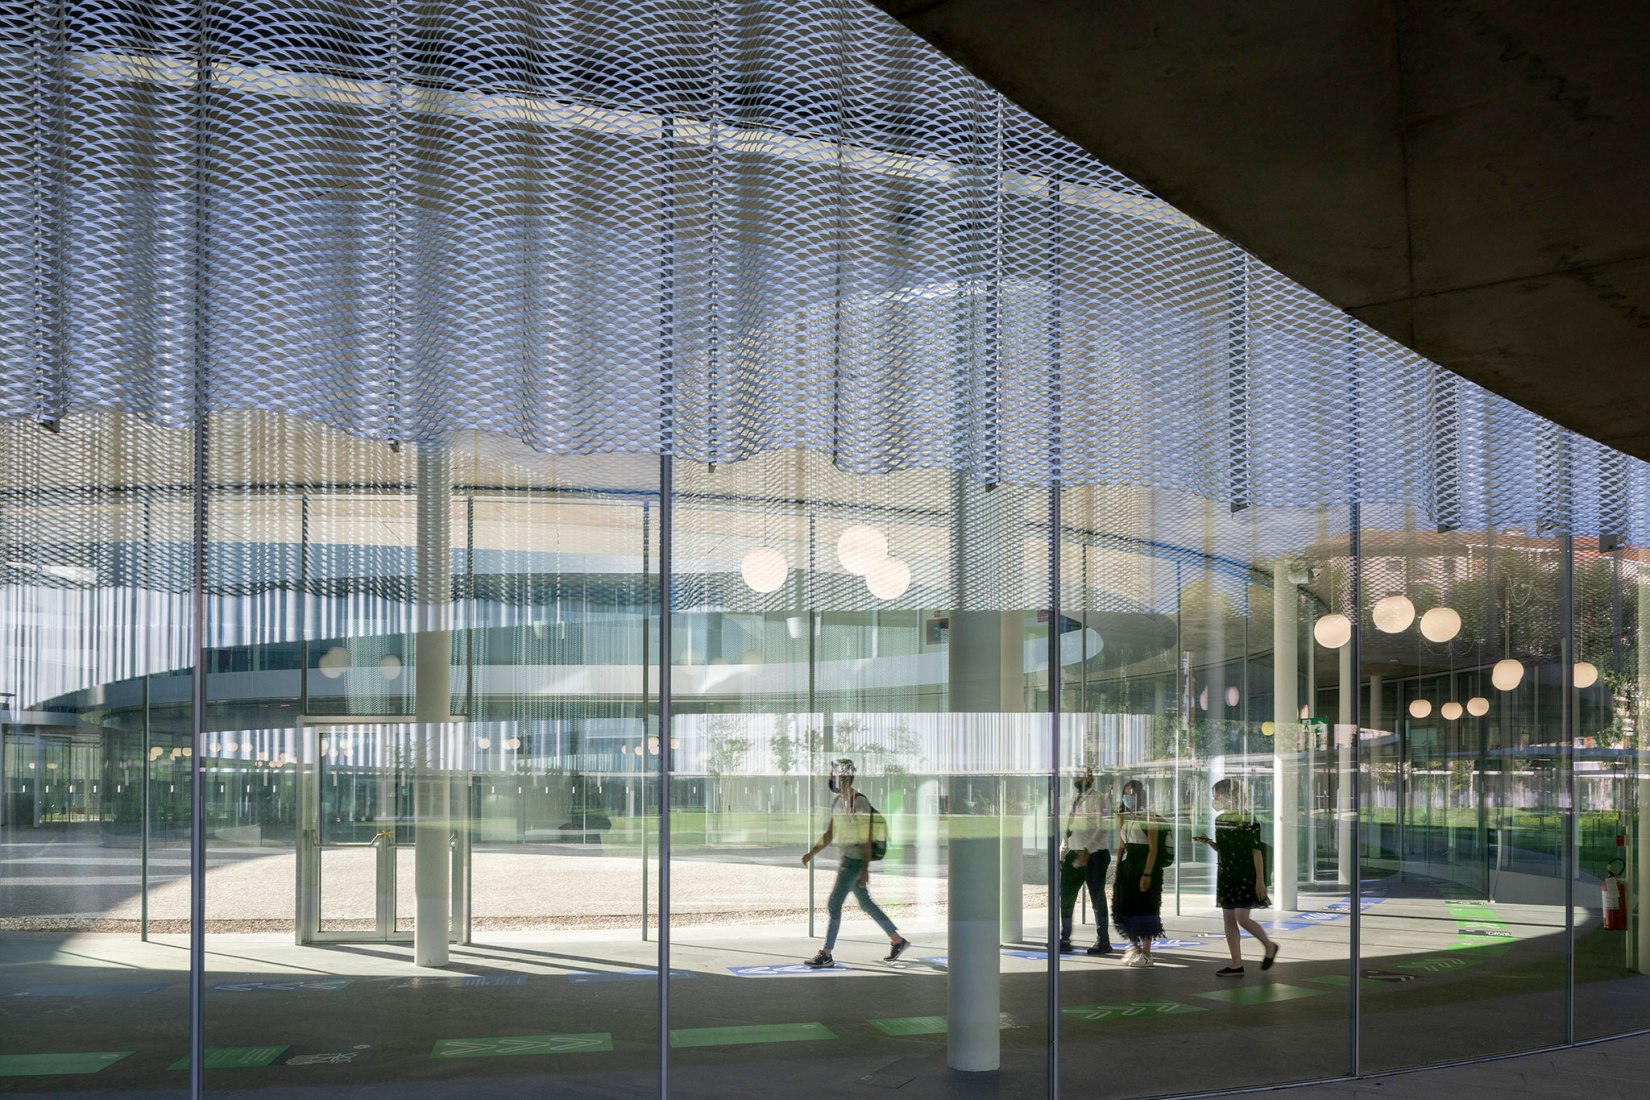 New Urban Campus for Bocconi University by SANAA. Photograph by Philippe Ruault.